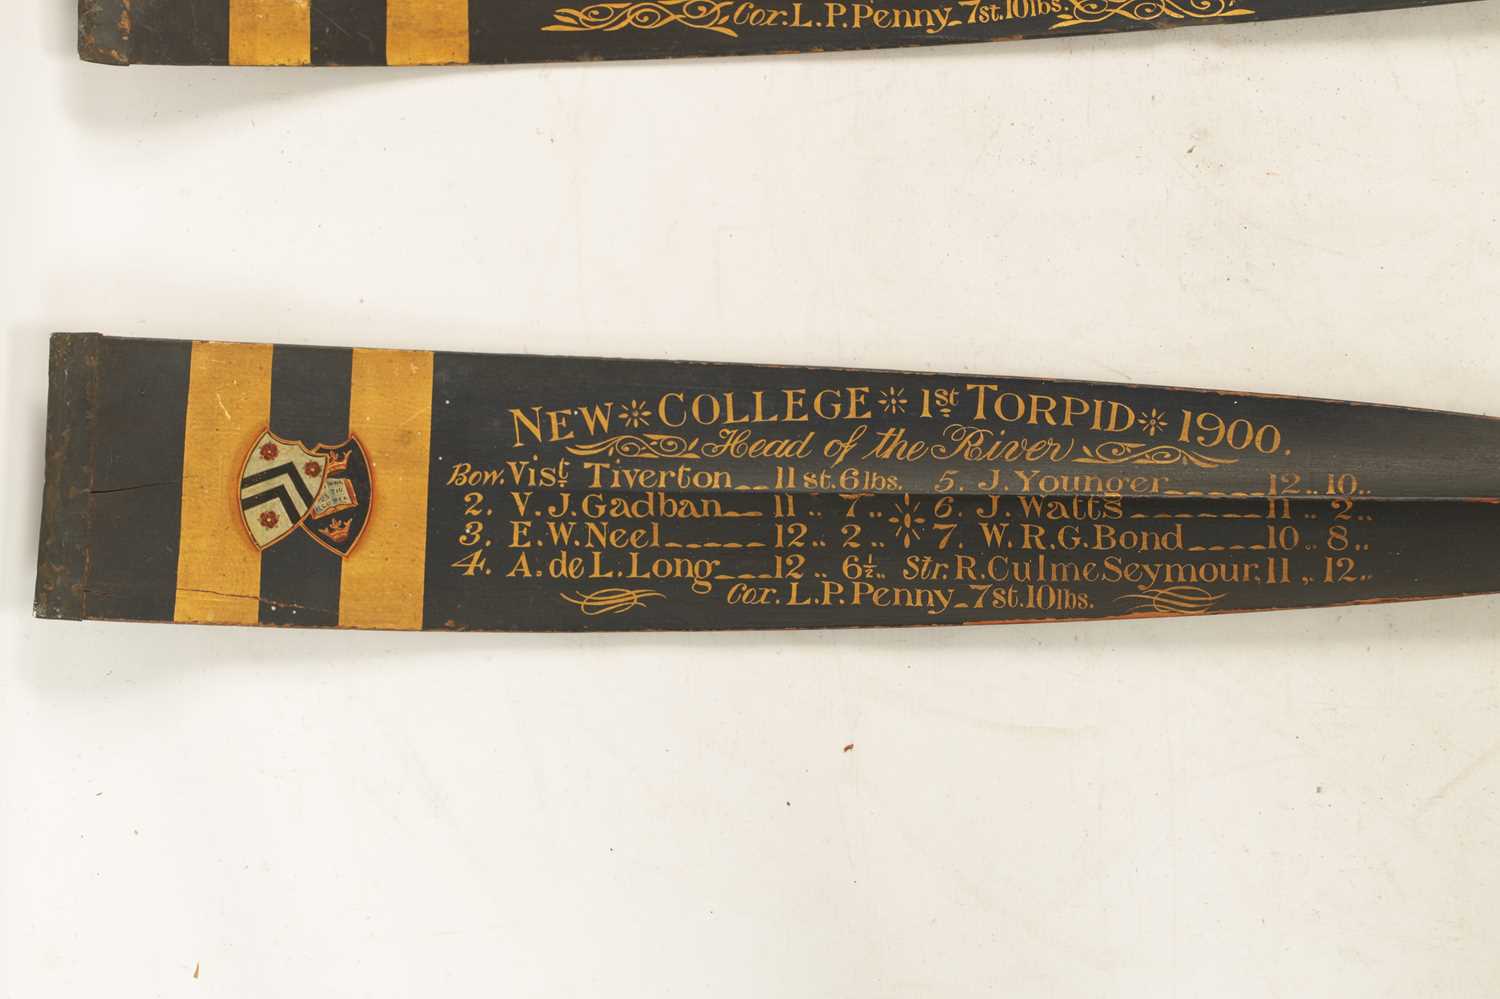 A GOOD PAIR OF PRESENTATIONS OXFORD UNIVERSITY ROWING OARS DATED 1900. - Image 10 of 14